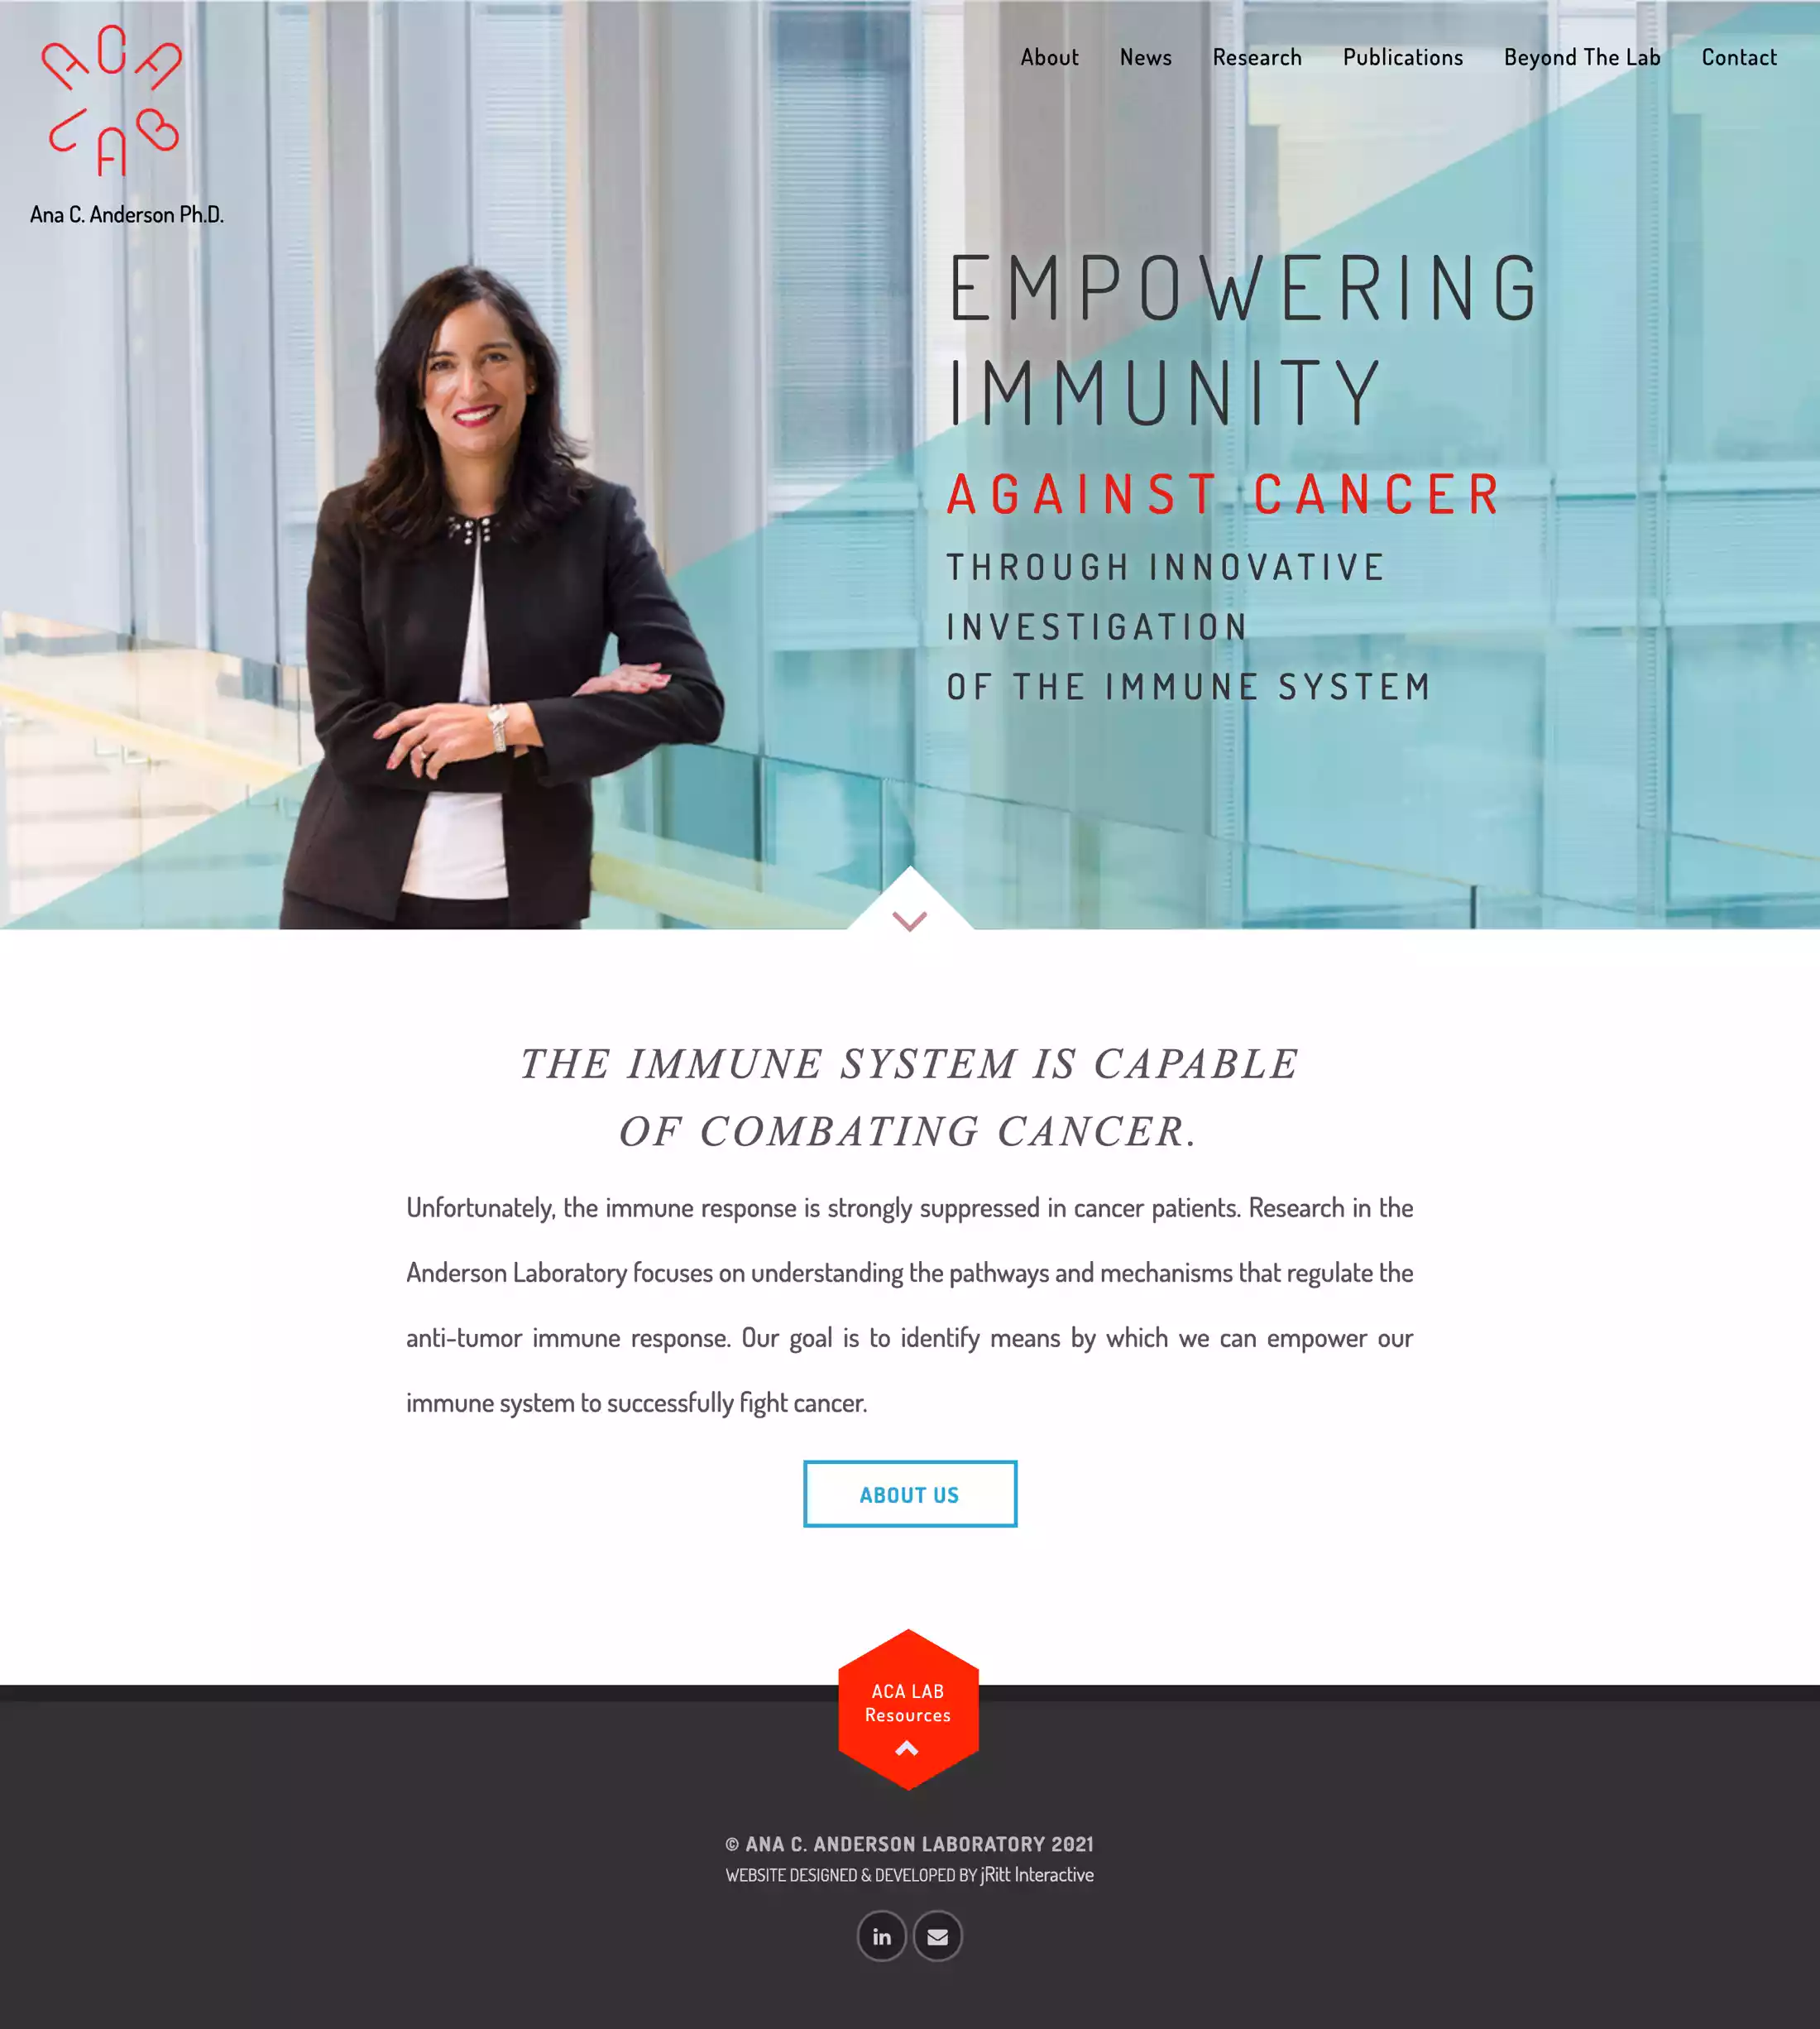 Create a brand identity and website for Dr. Anderson's pioneering cancer research lab